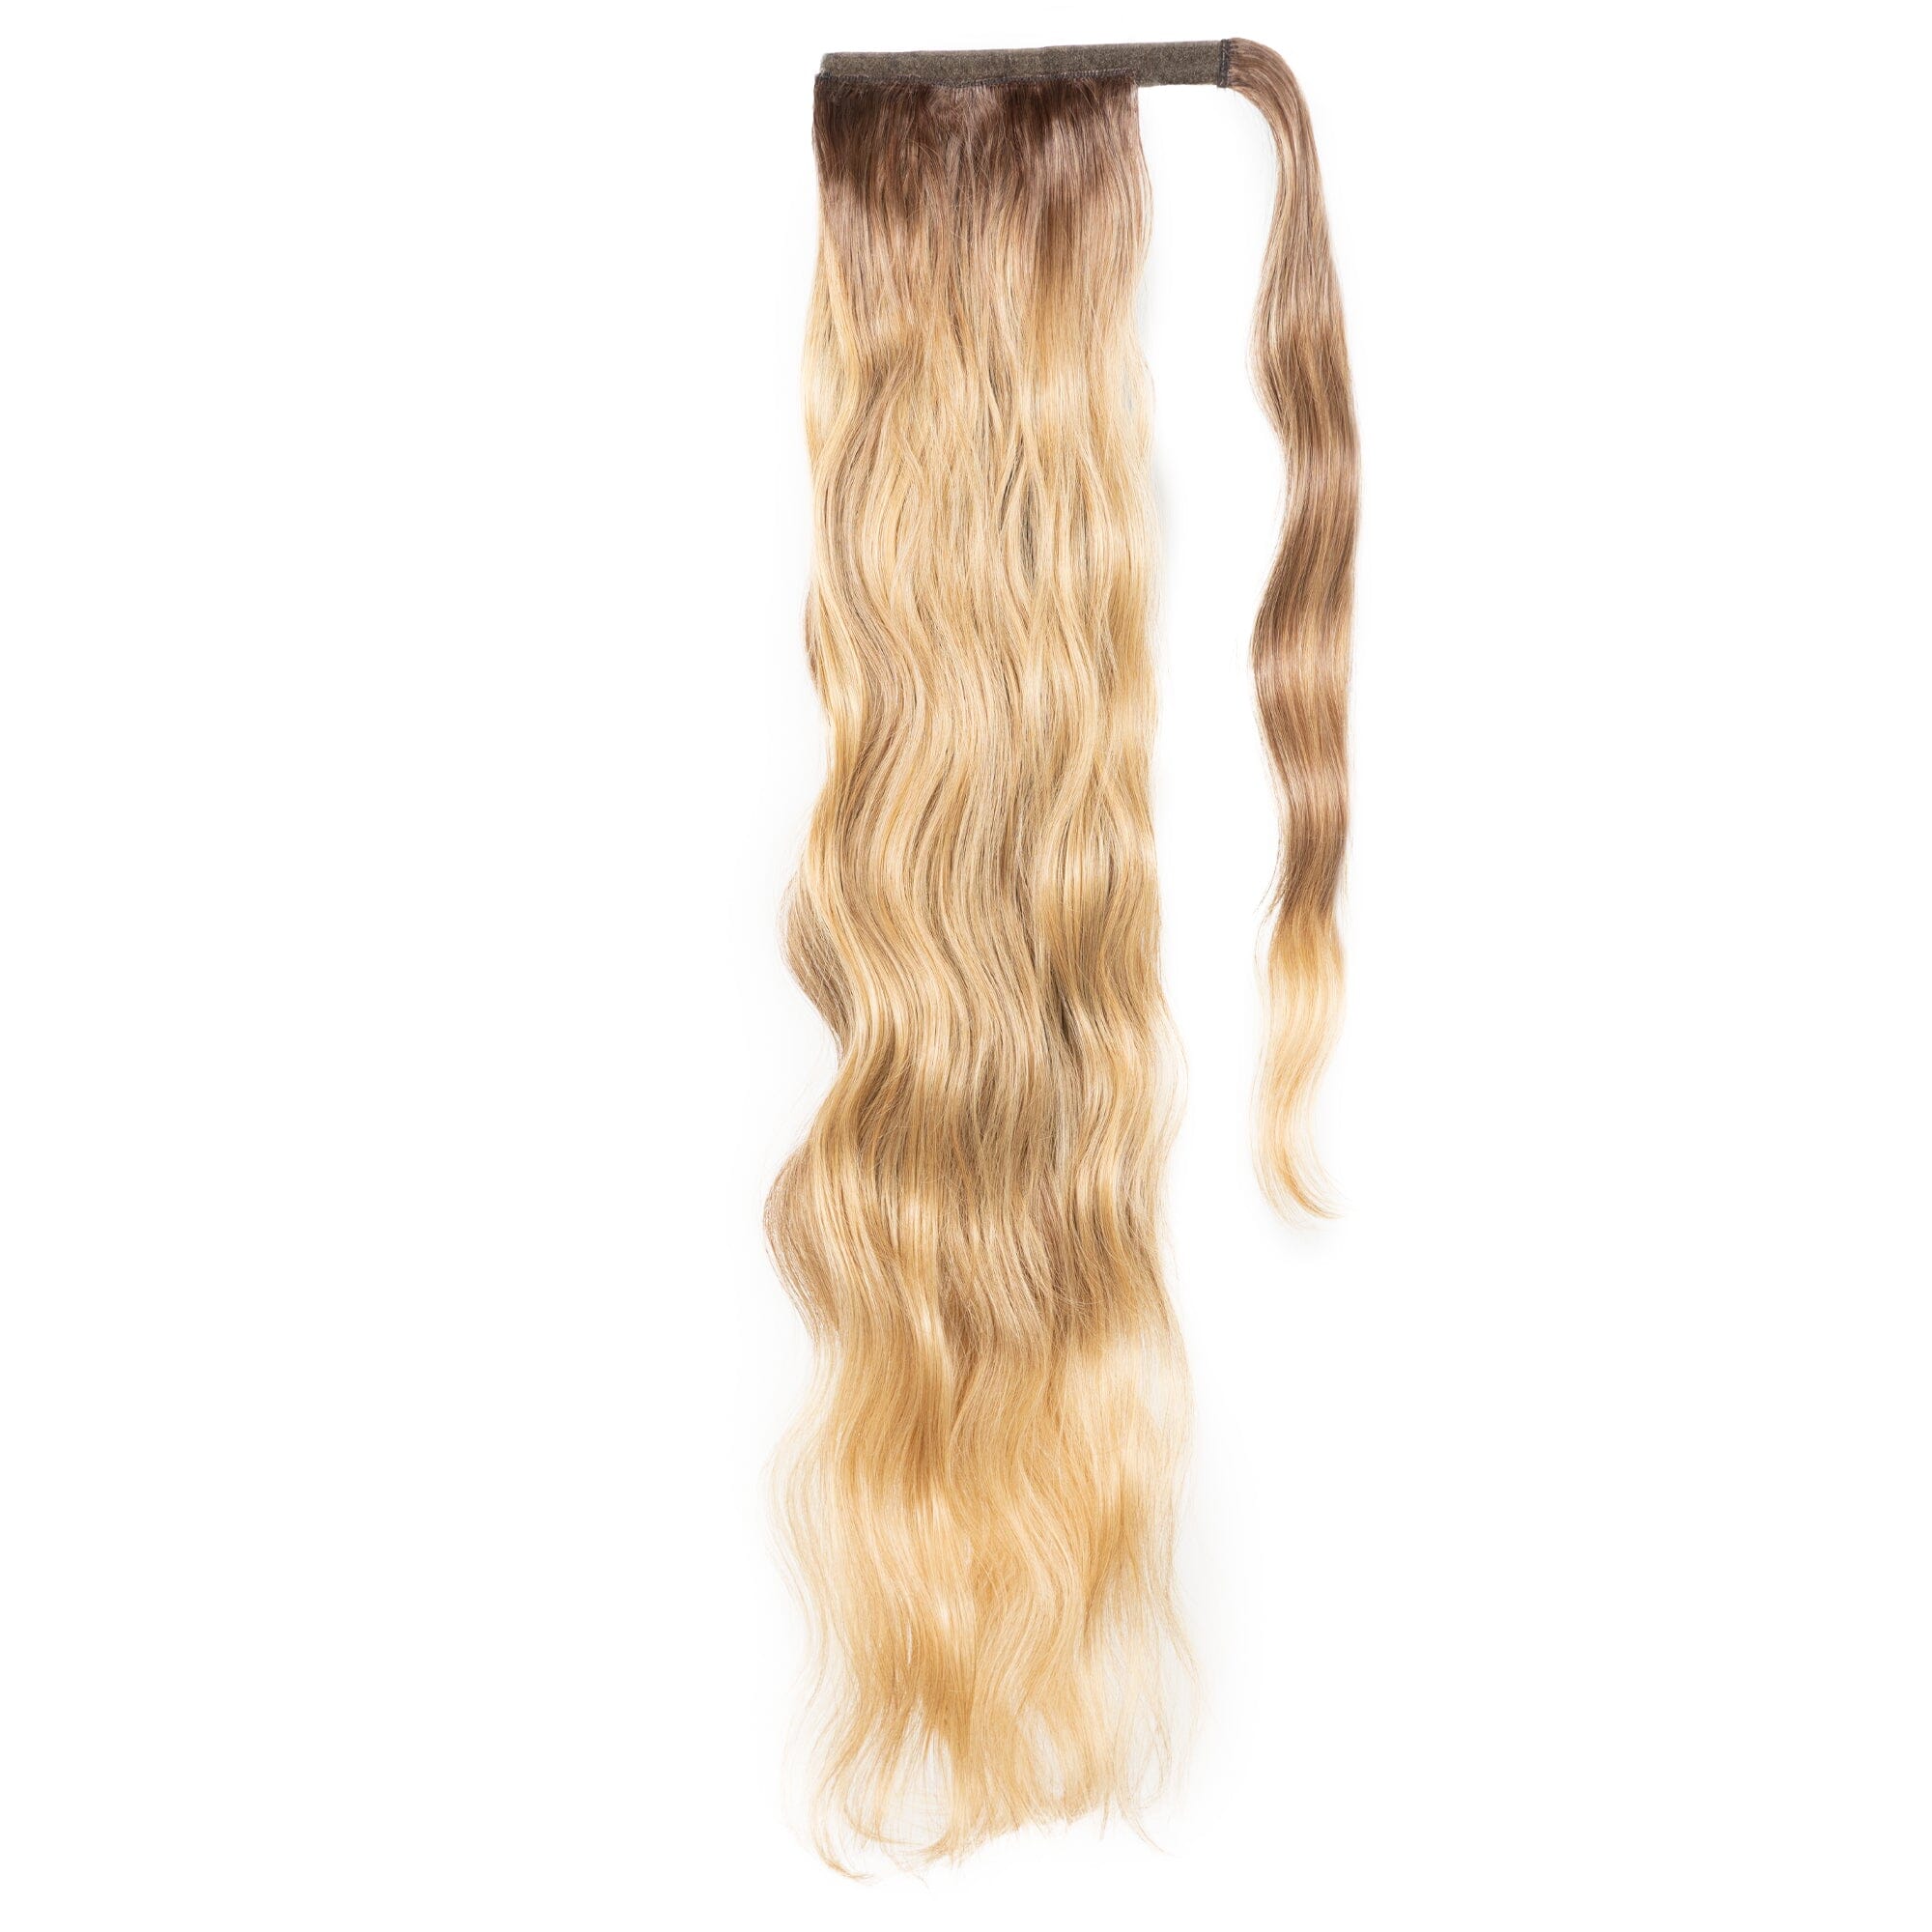 Long Clip-In Ponytails (22" - 30") Clip In Ponytail Easilocks 30"Body Wave Clip-In Ponytail Vanilla Balayage 